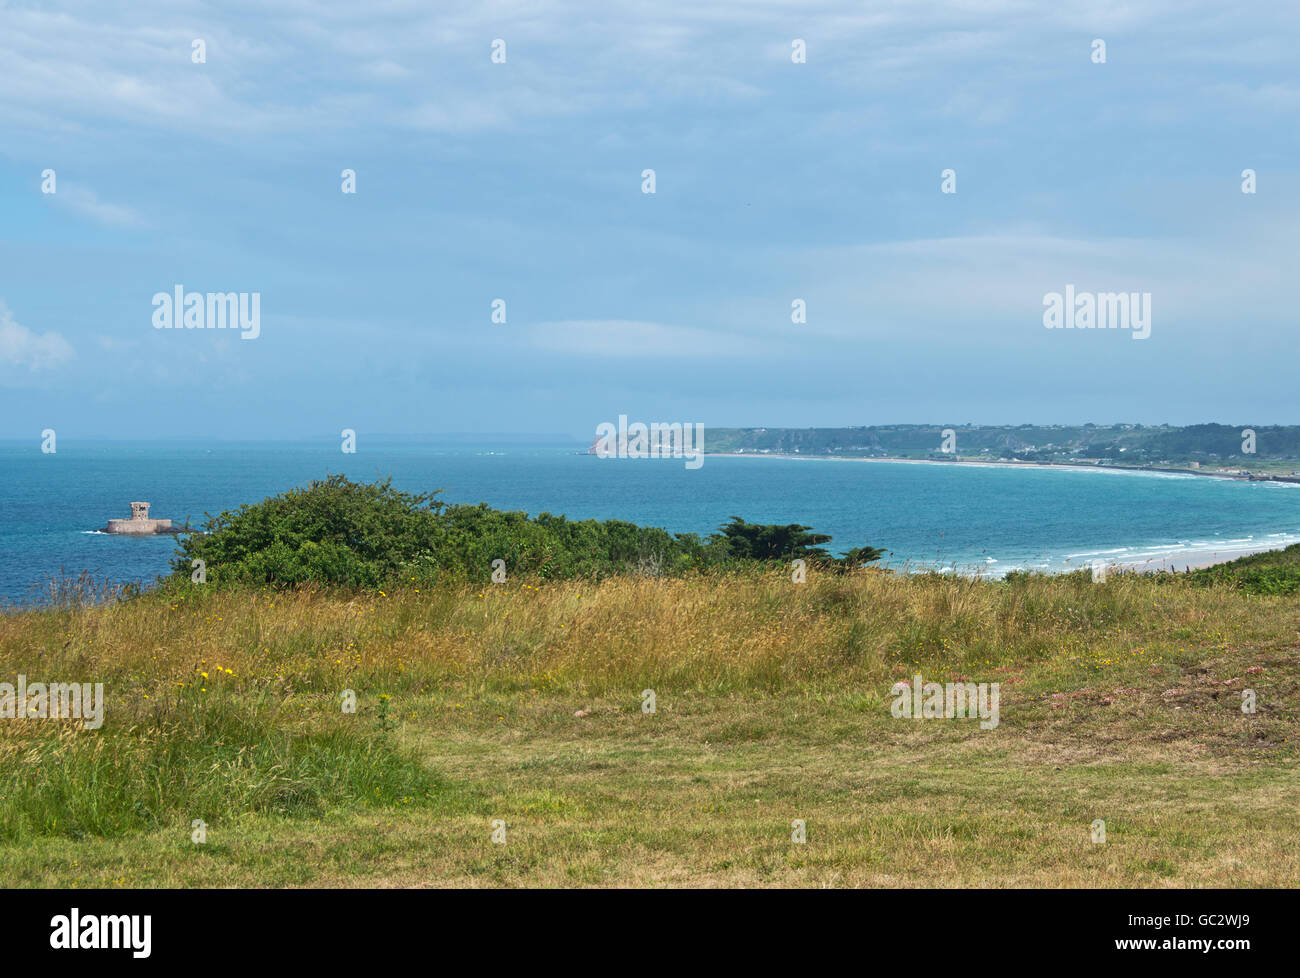 St Ouen's Bay, Jersey, Channel Island Stock Photo